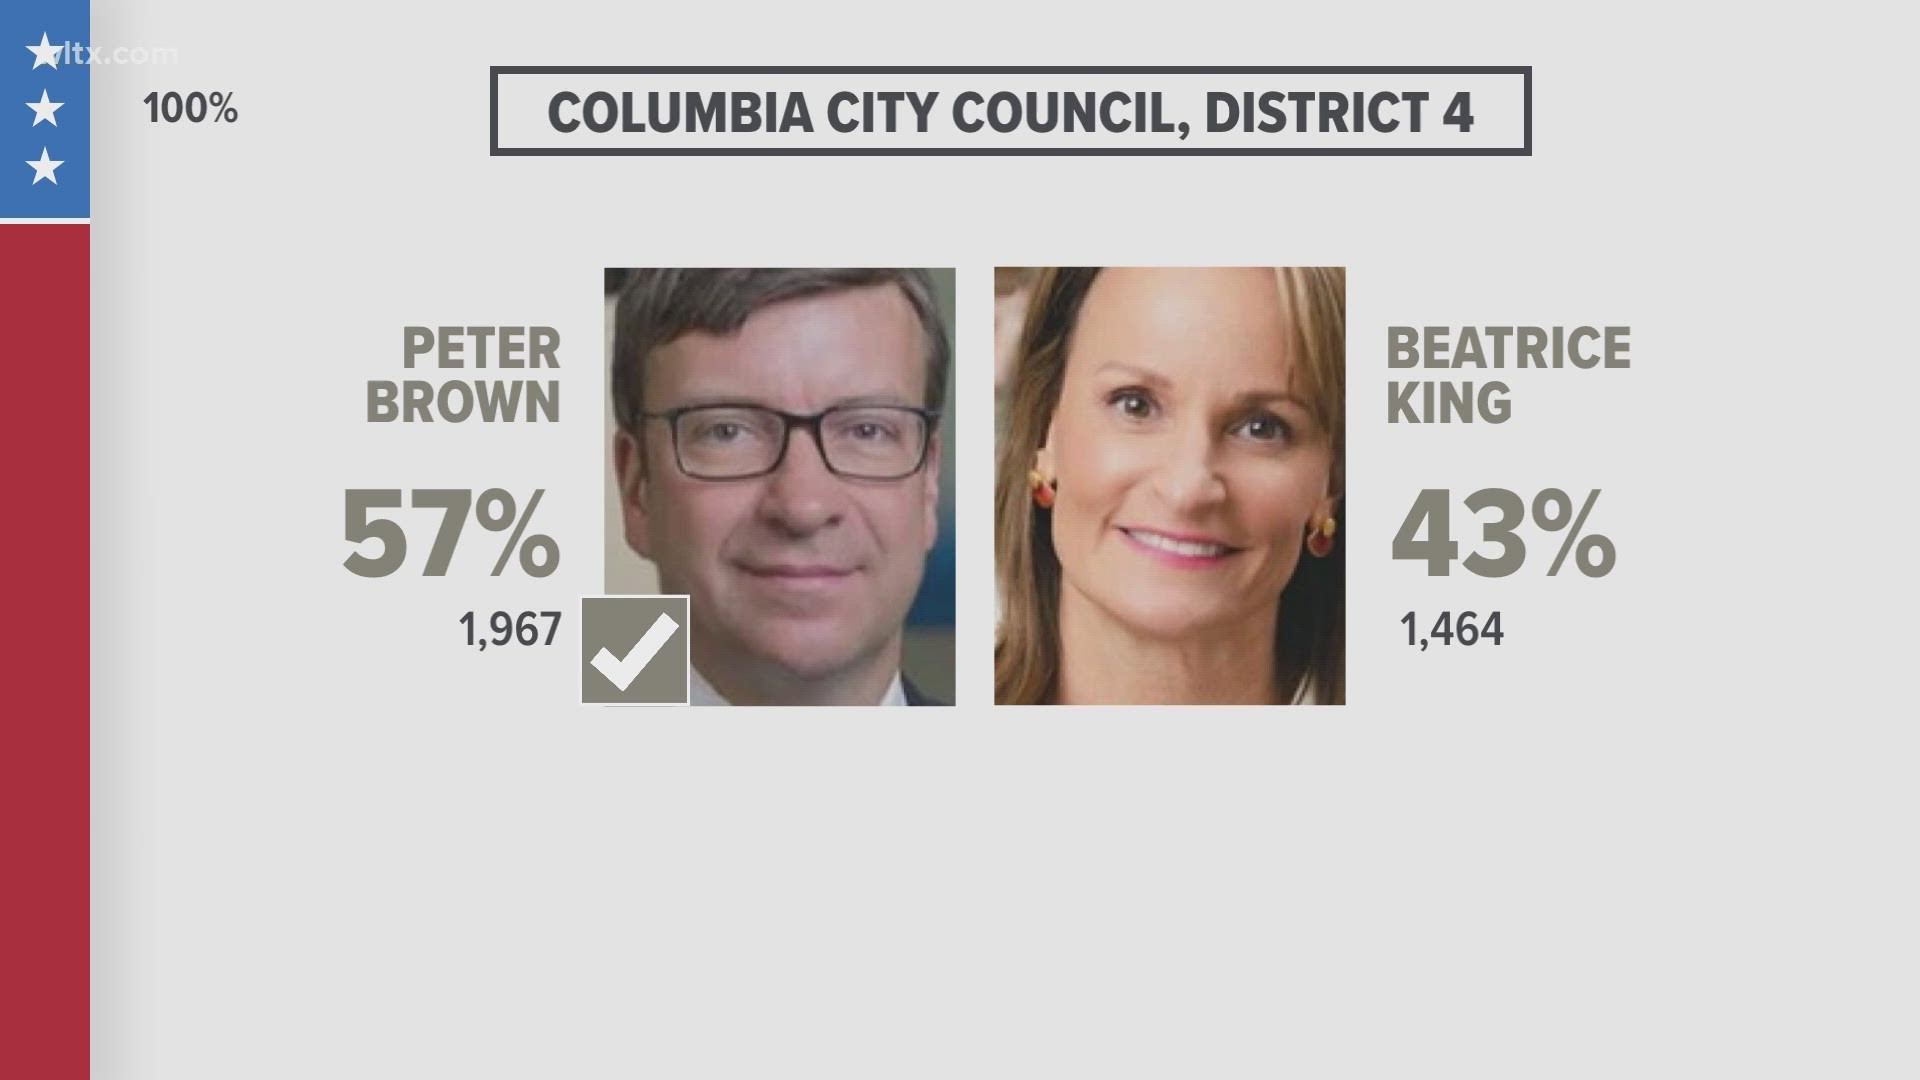 Peter Brown and Beatrice King were seeking the open District 4 seat on council after death of Councilman Joe Taylor.